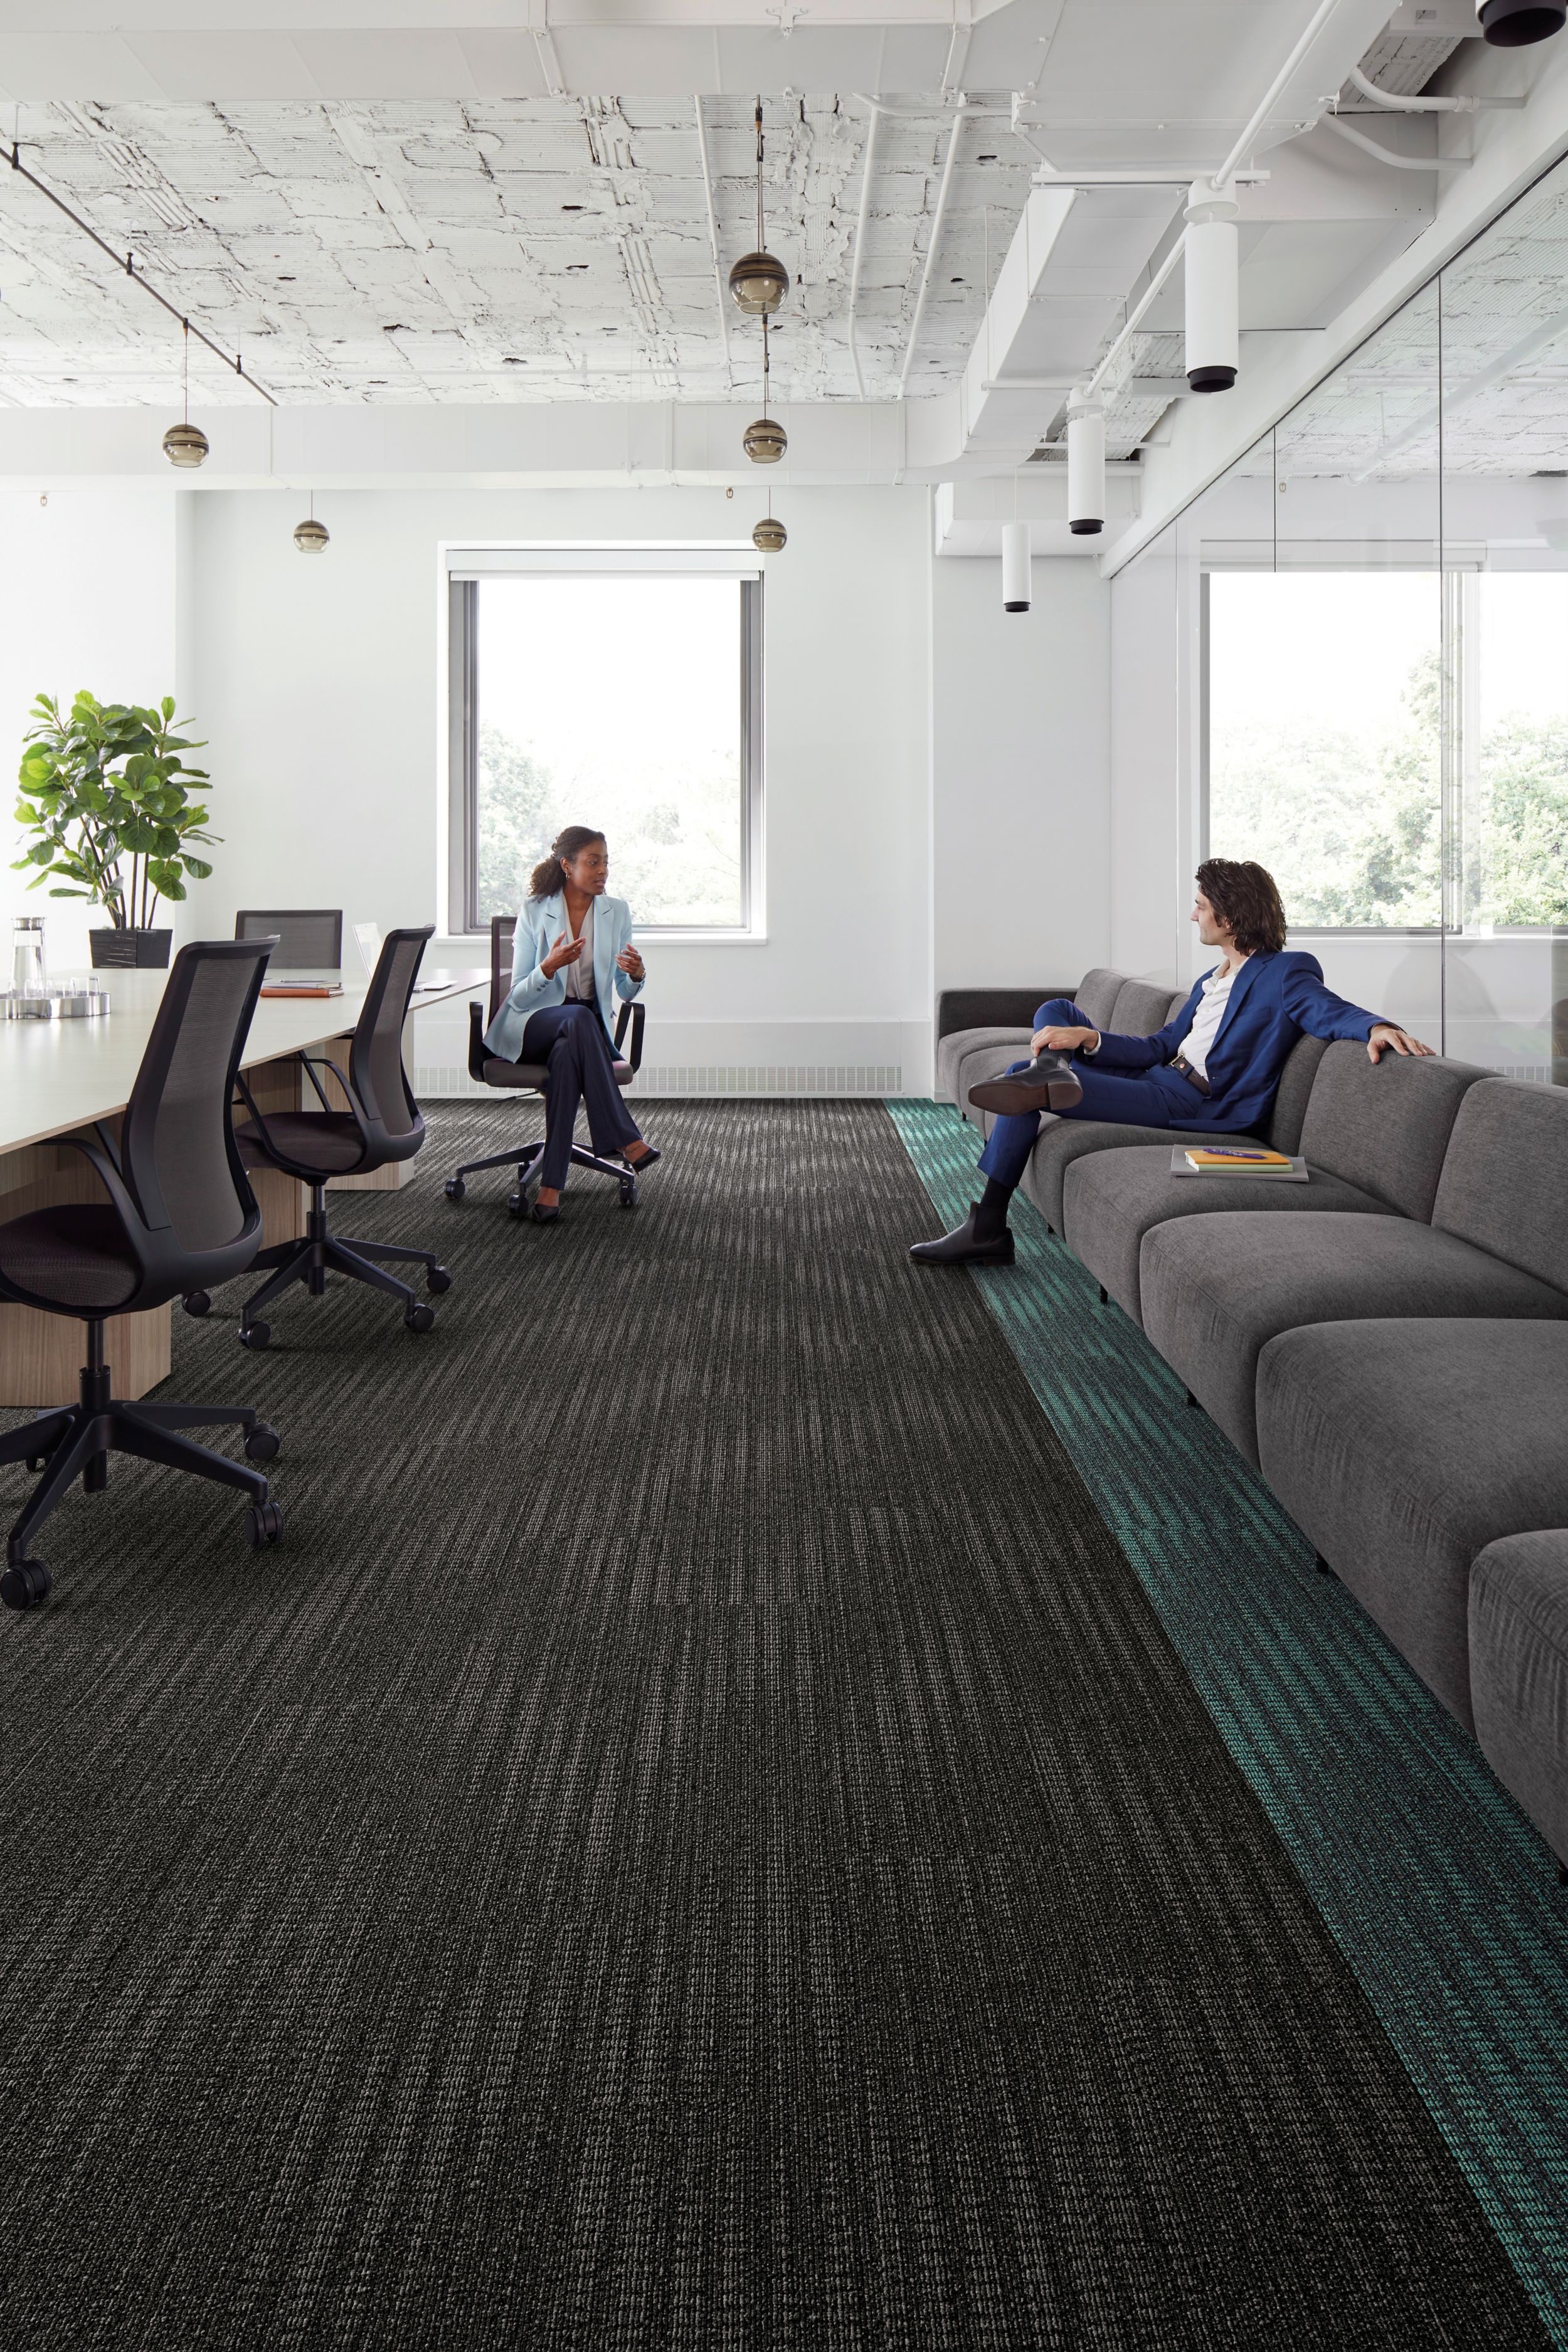 Interface Karmic Relief plank carpet tiles with man sitting on couch collaborating with woman in office chair numéro d’image 2